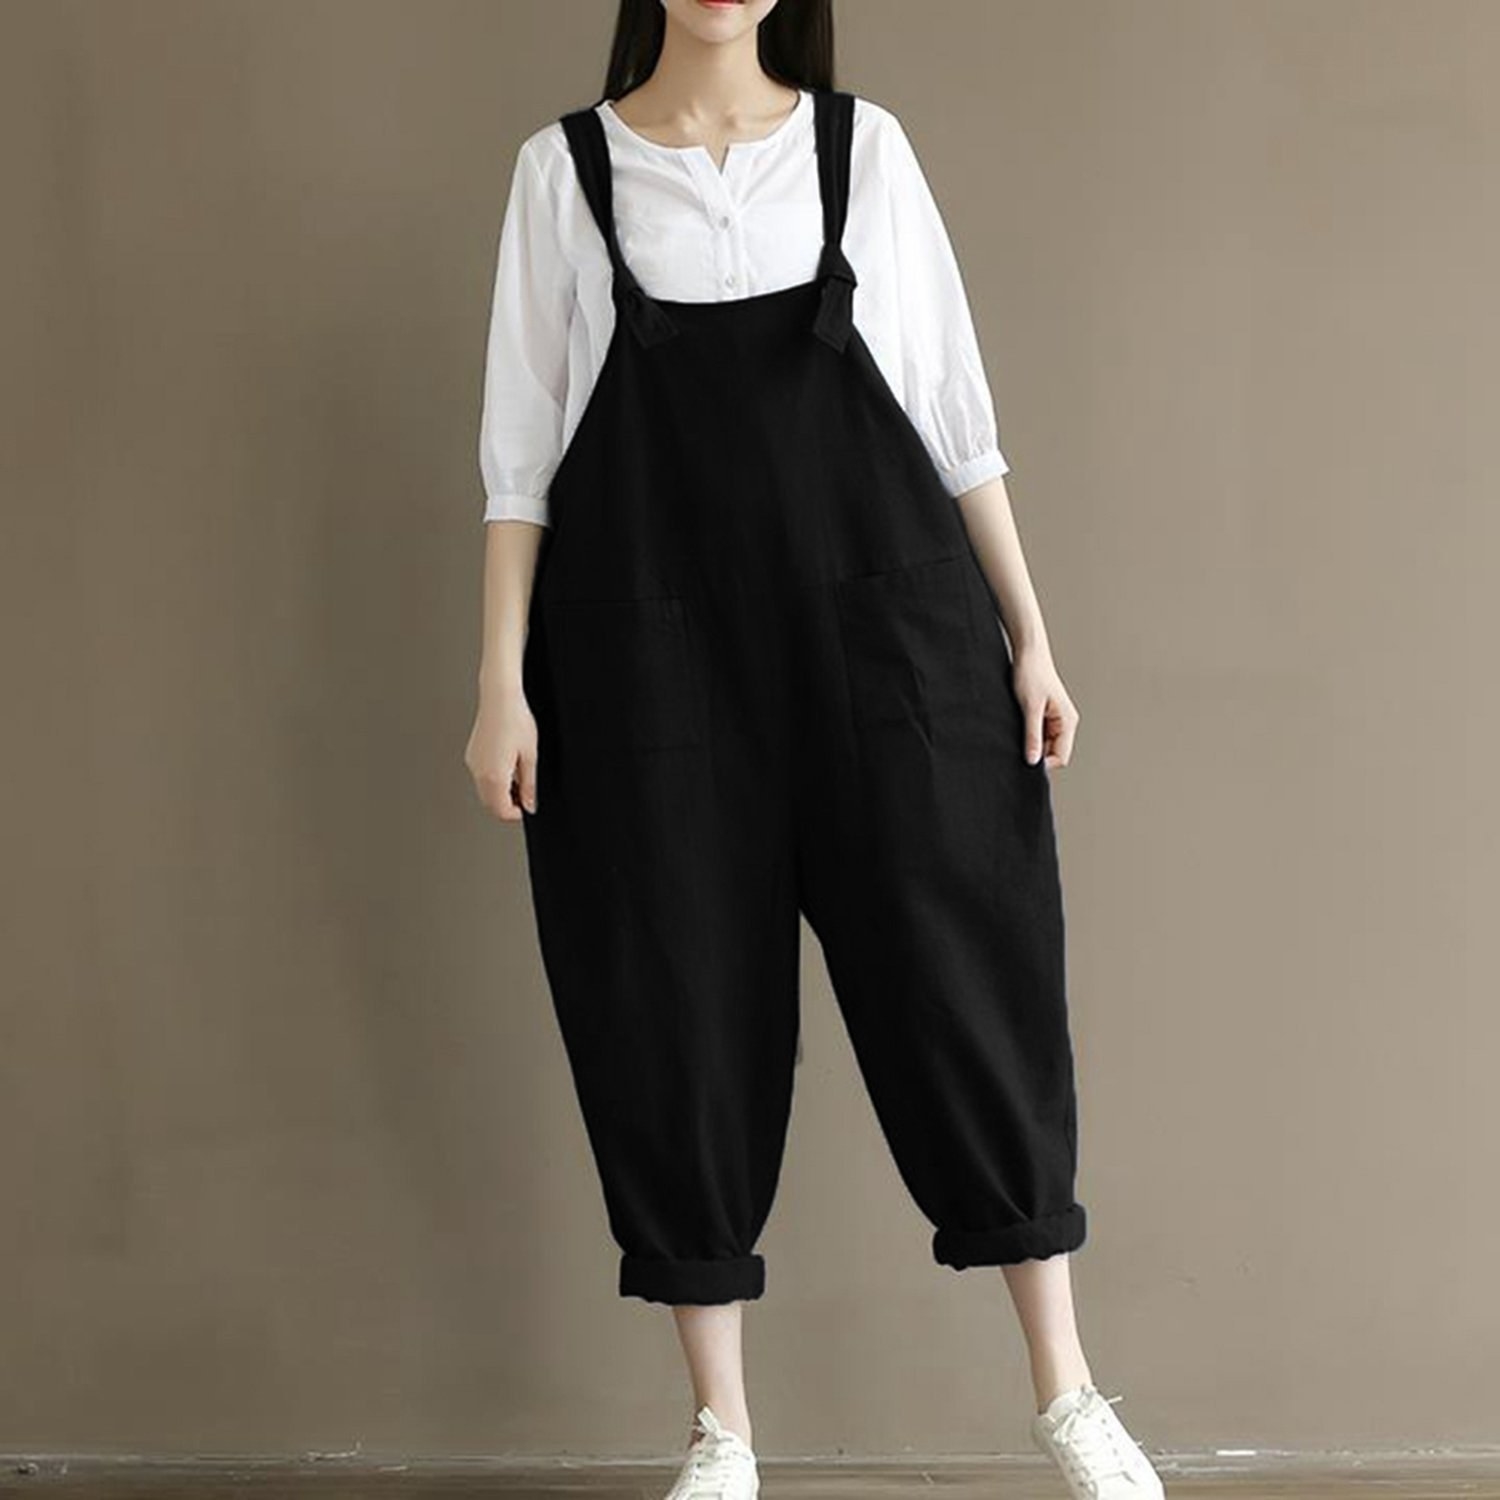 model shows how loose the overalls with cuffed bottoms